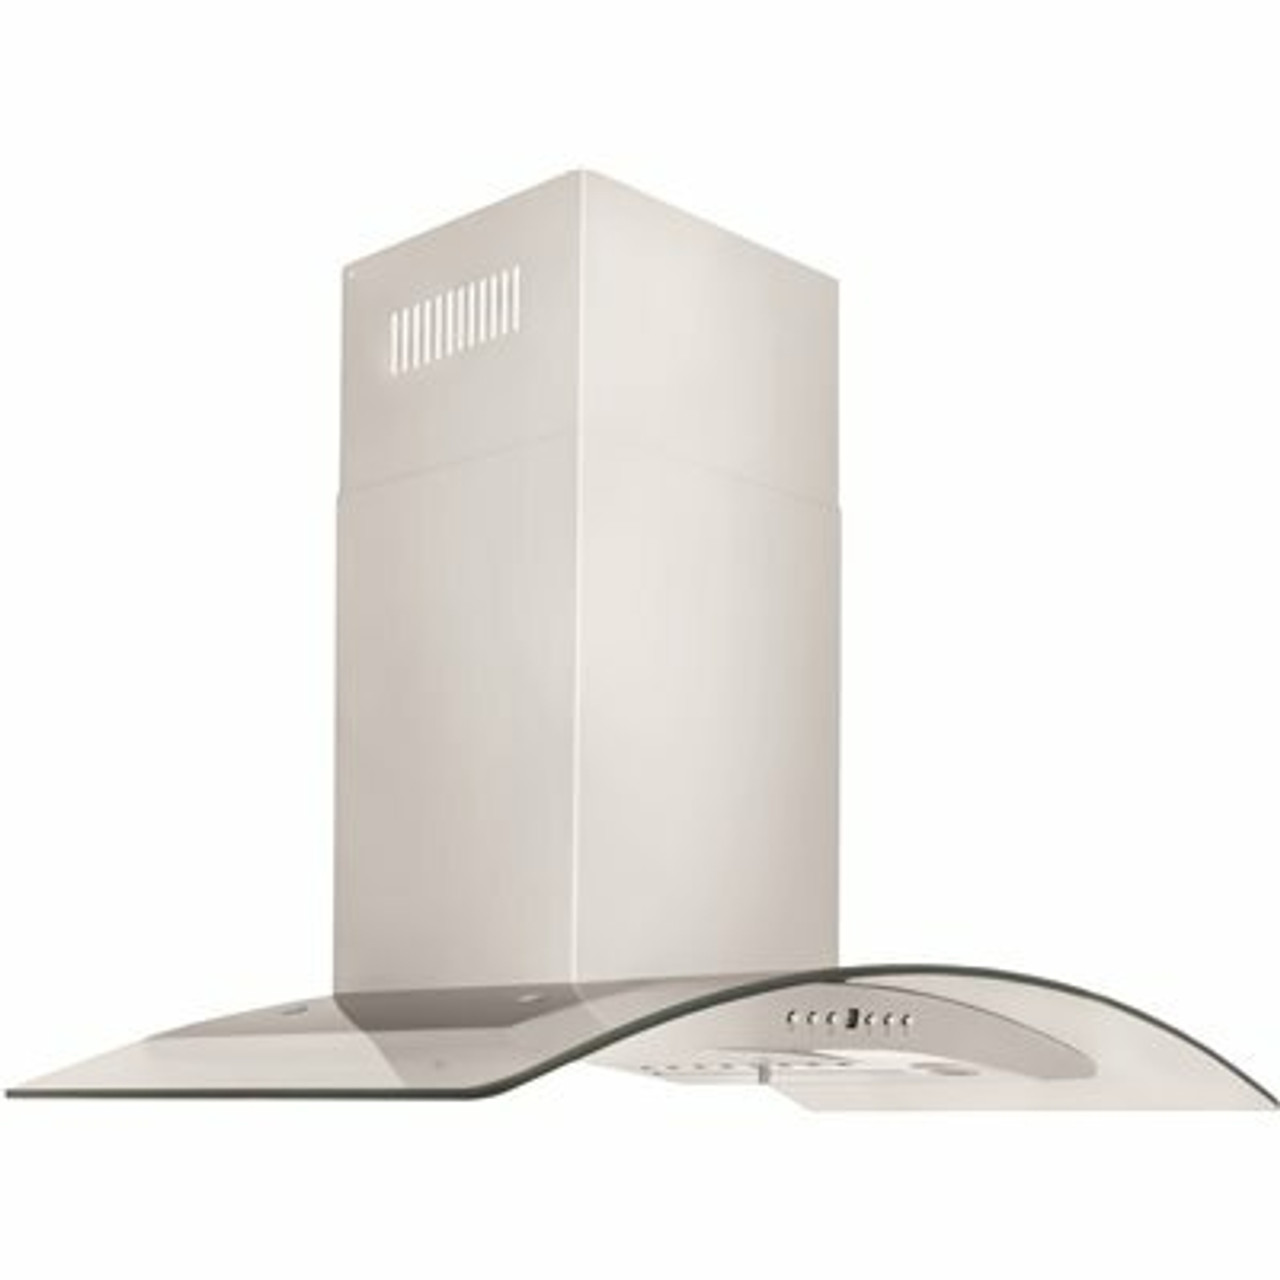 Zline Kitchen And Bath 36 In. Convertible Vent Wall Mount Range Hood In Stainless Steel And Glass (Kn4-36)